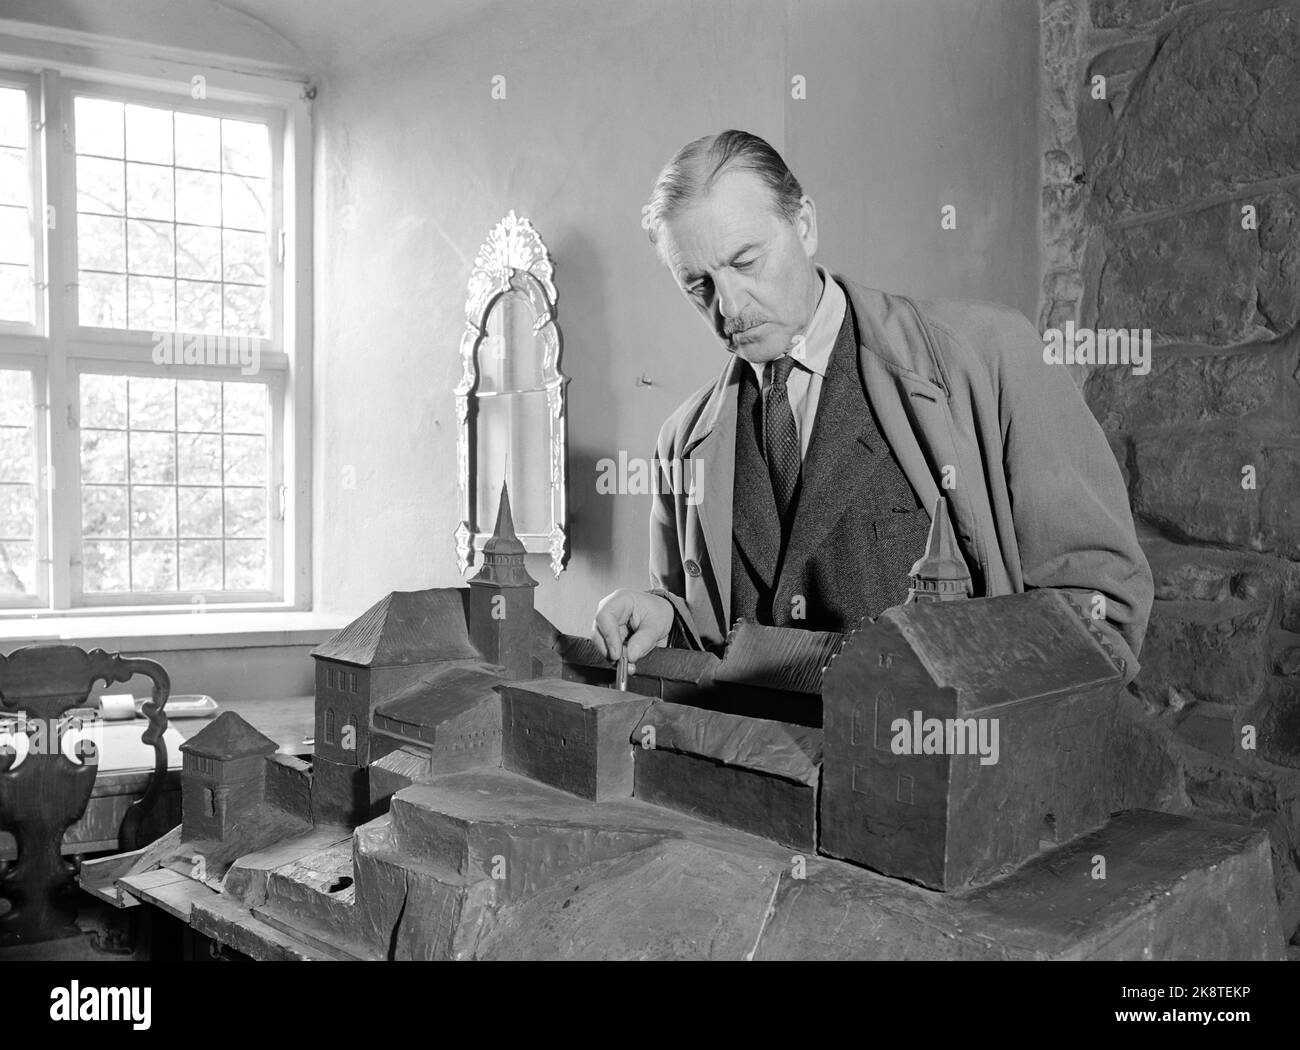 Oslo 195012. Architect Arnstein Arneberg has received the honorable assignments as an interior architect by the Security Council's meeting room in the UN. The Ministry of Foreign Affairs has allocated money for the work that is a gift from Norway. Arneberg in front of the model of Akershus castle that he led the restoration of. Photo: Current / NTB Stock Photo